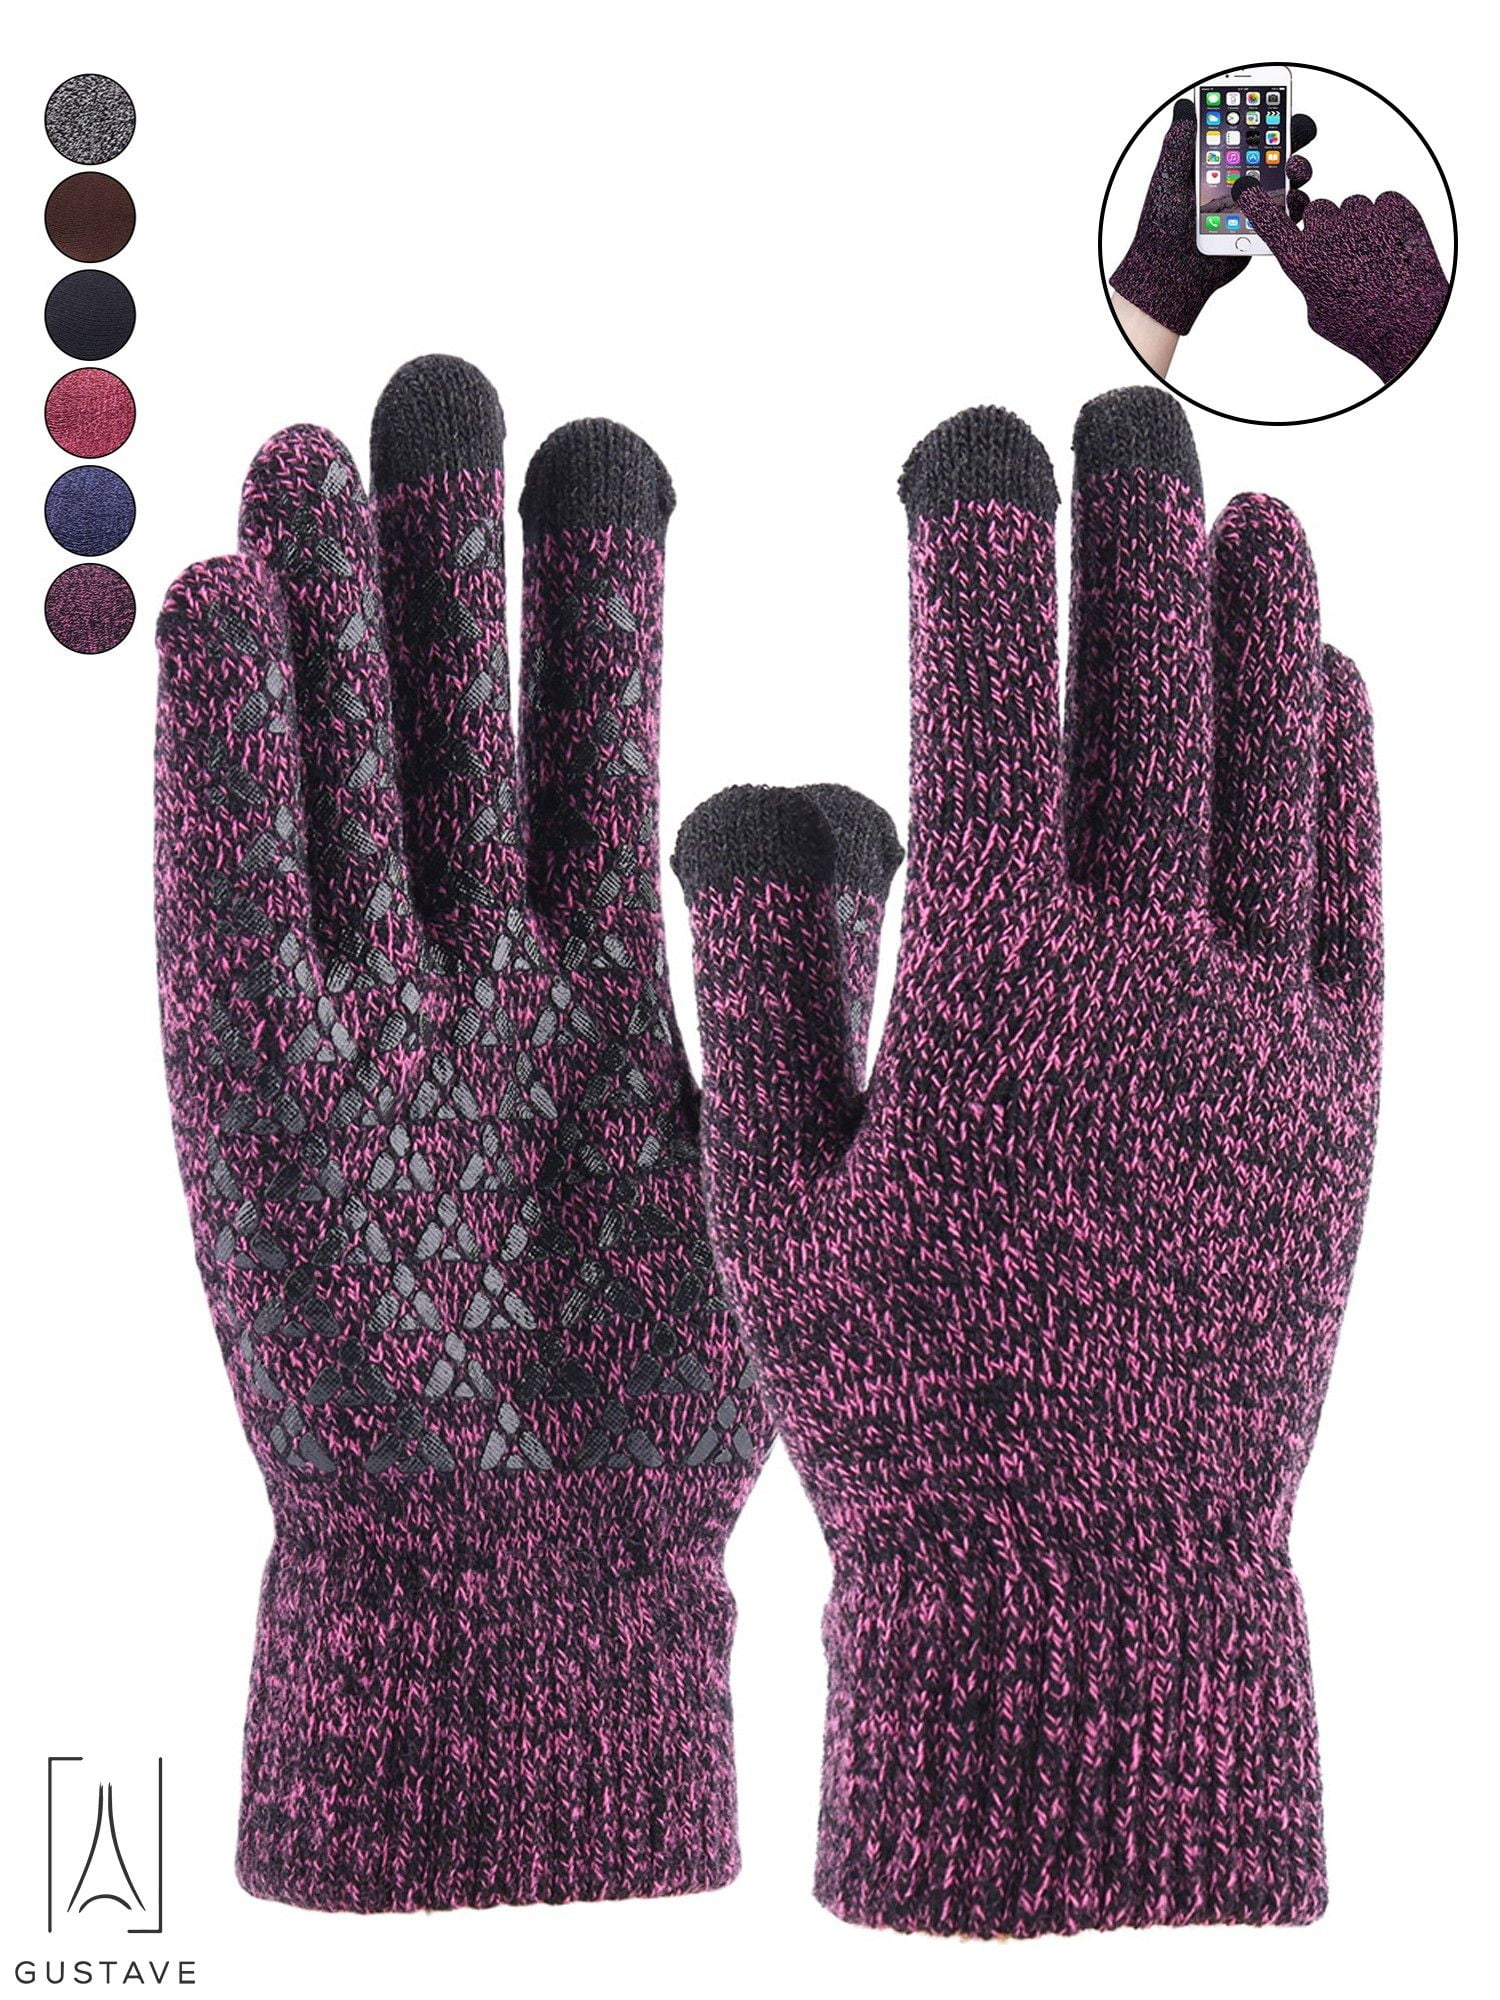 Max Heat Ladies Fashion Stripe Thermal Gloves Winter Mittens Thick Knitted Warm 